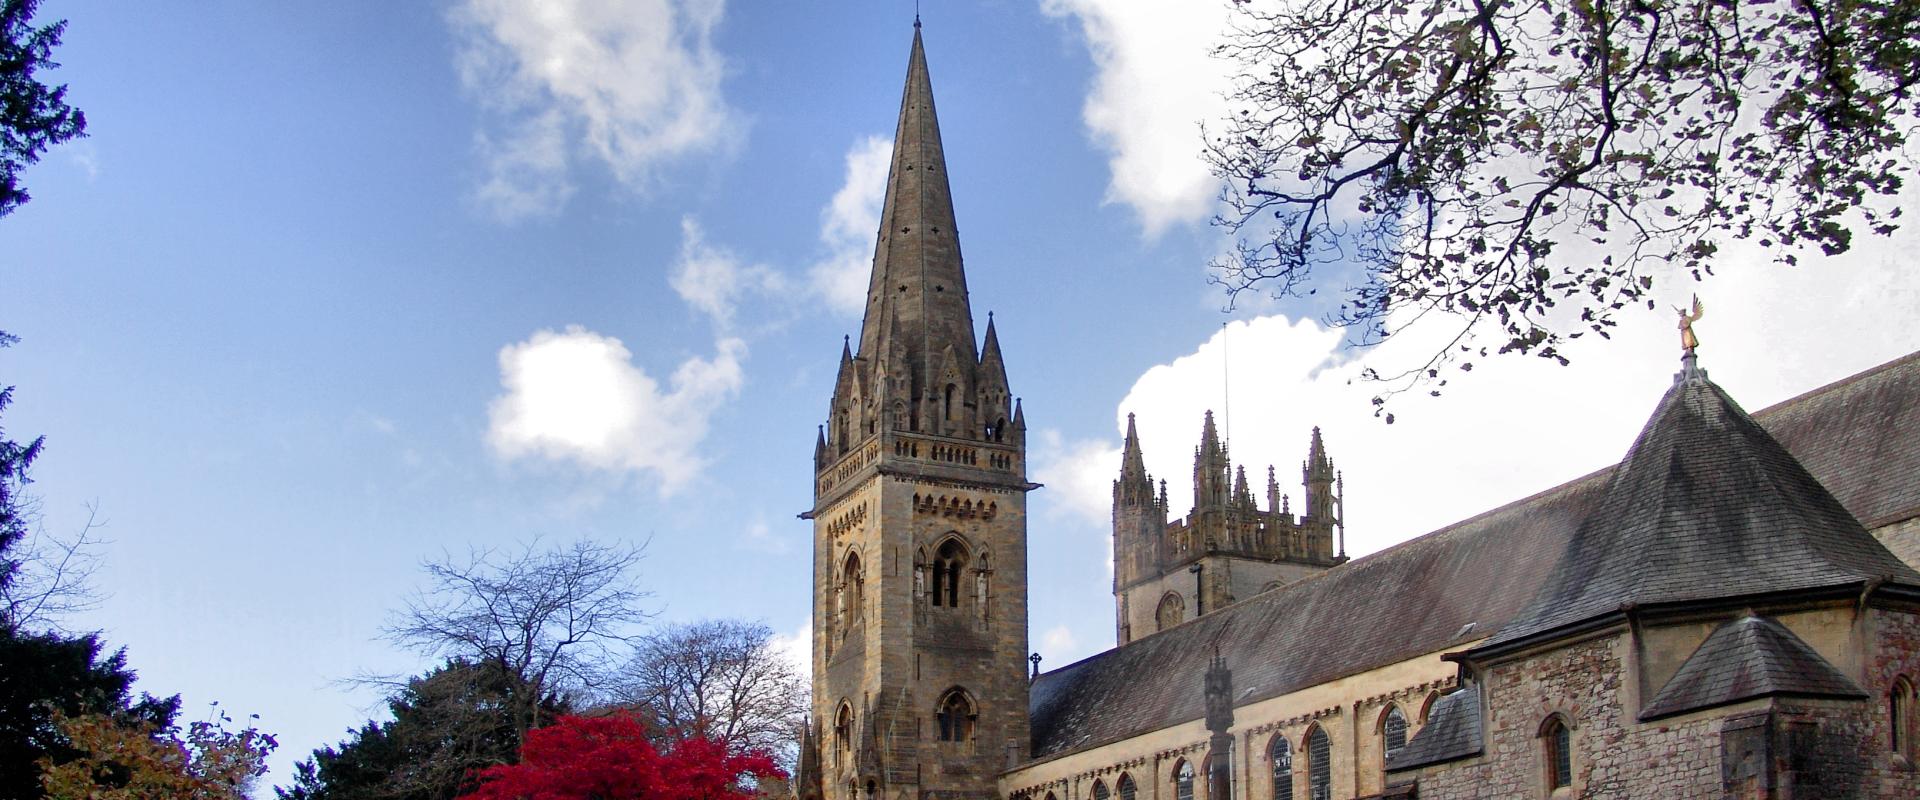 outside image of Llandaff cathedral in autumn